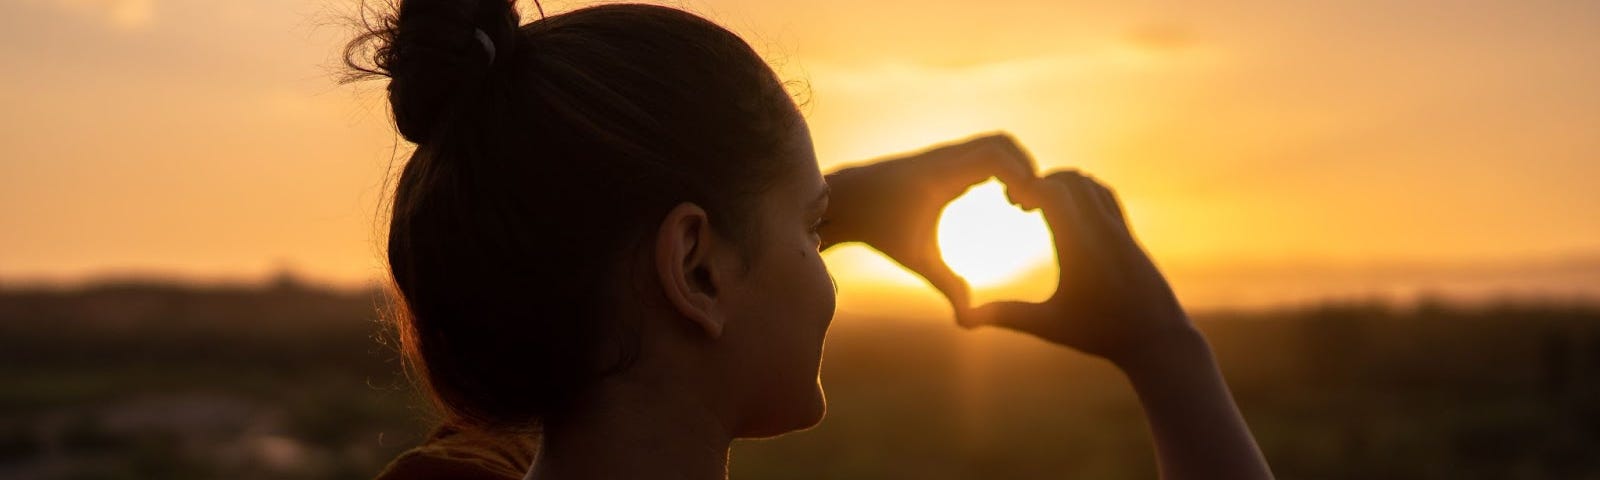 Woman making a heart with her hands in the sunset.